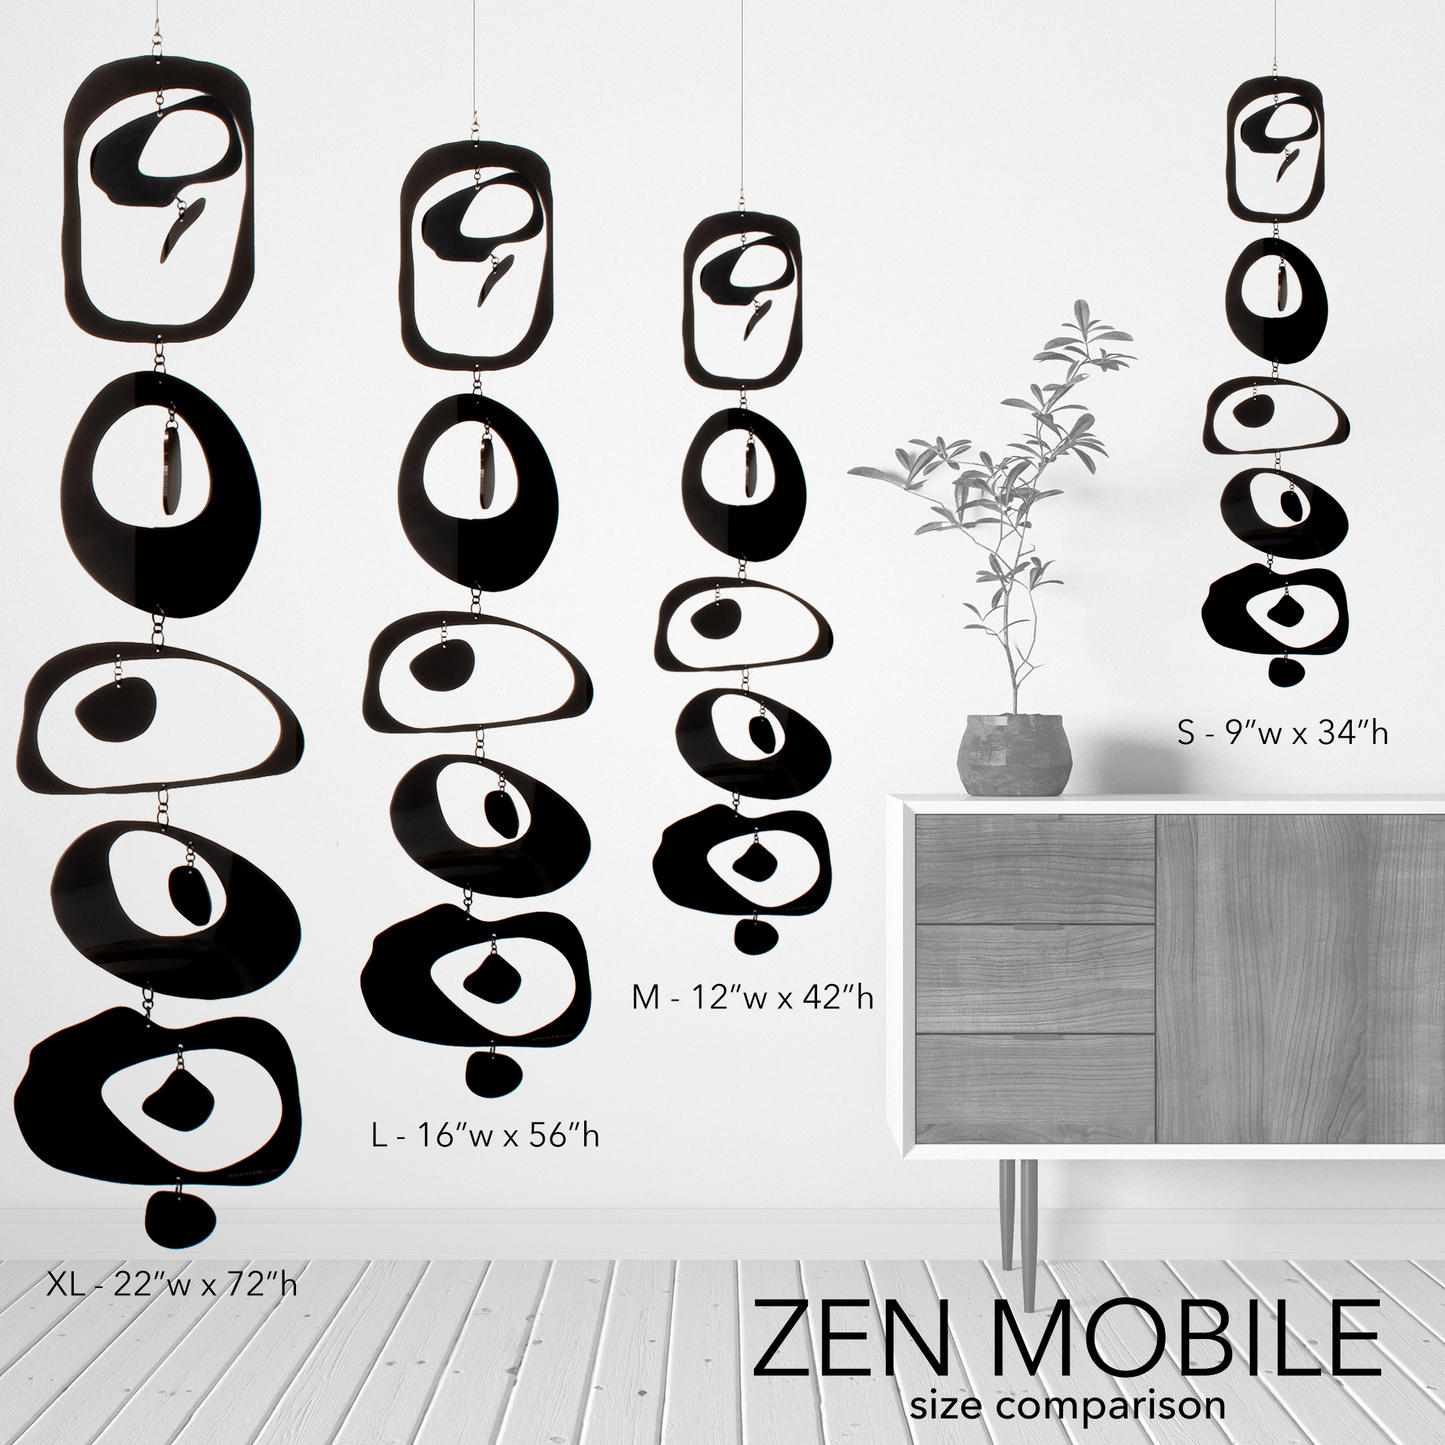 Zen Mobile Size Comparison Chart - zen inspired hanging art mobiles by AtomicMobiles.com